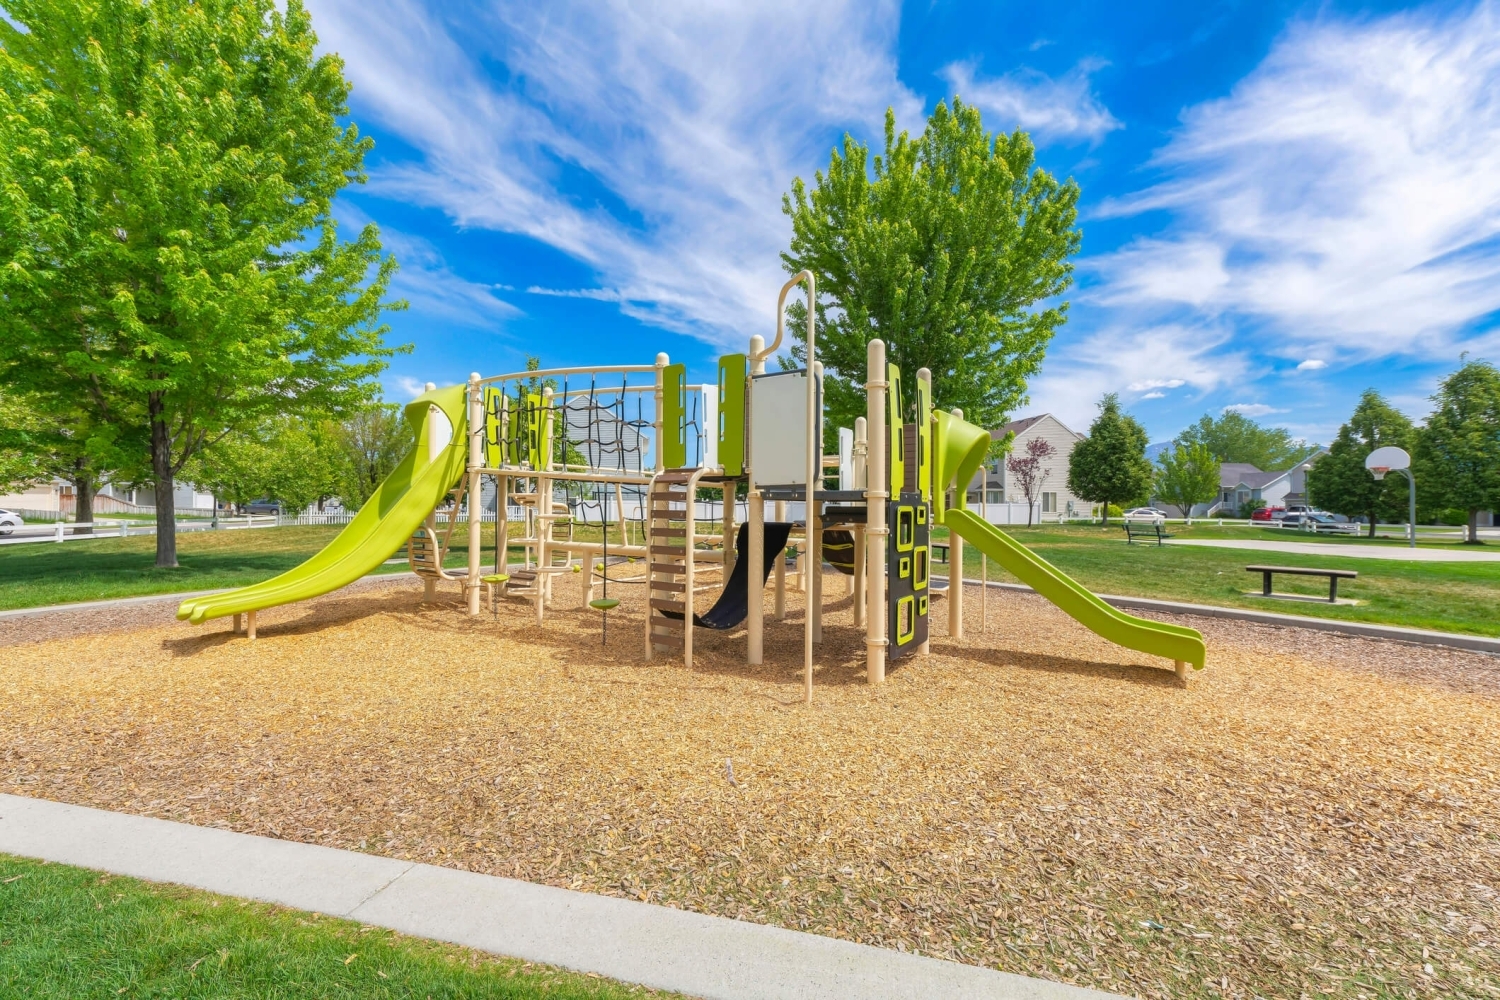 A green anbrown-coloreded playground in a public play area surrounded by trees and a blue sky.